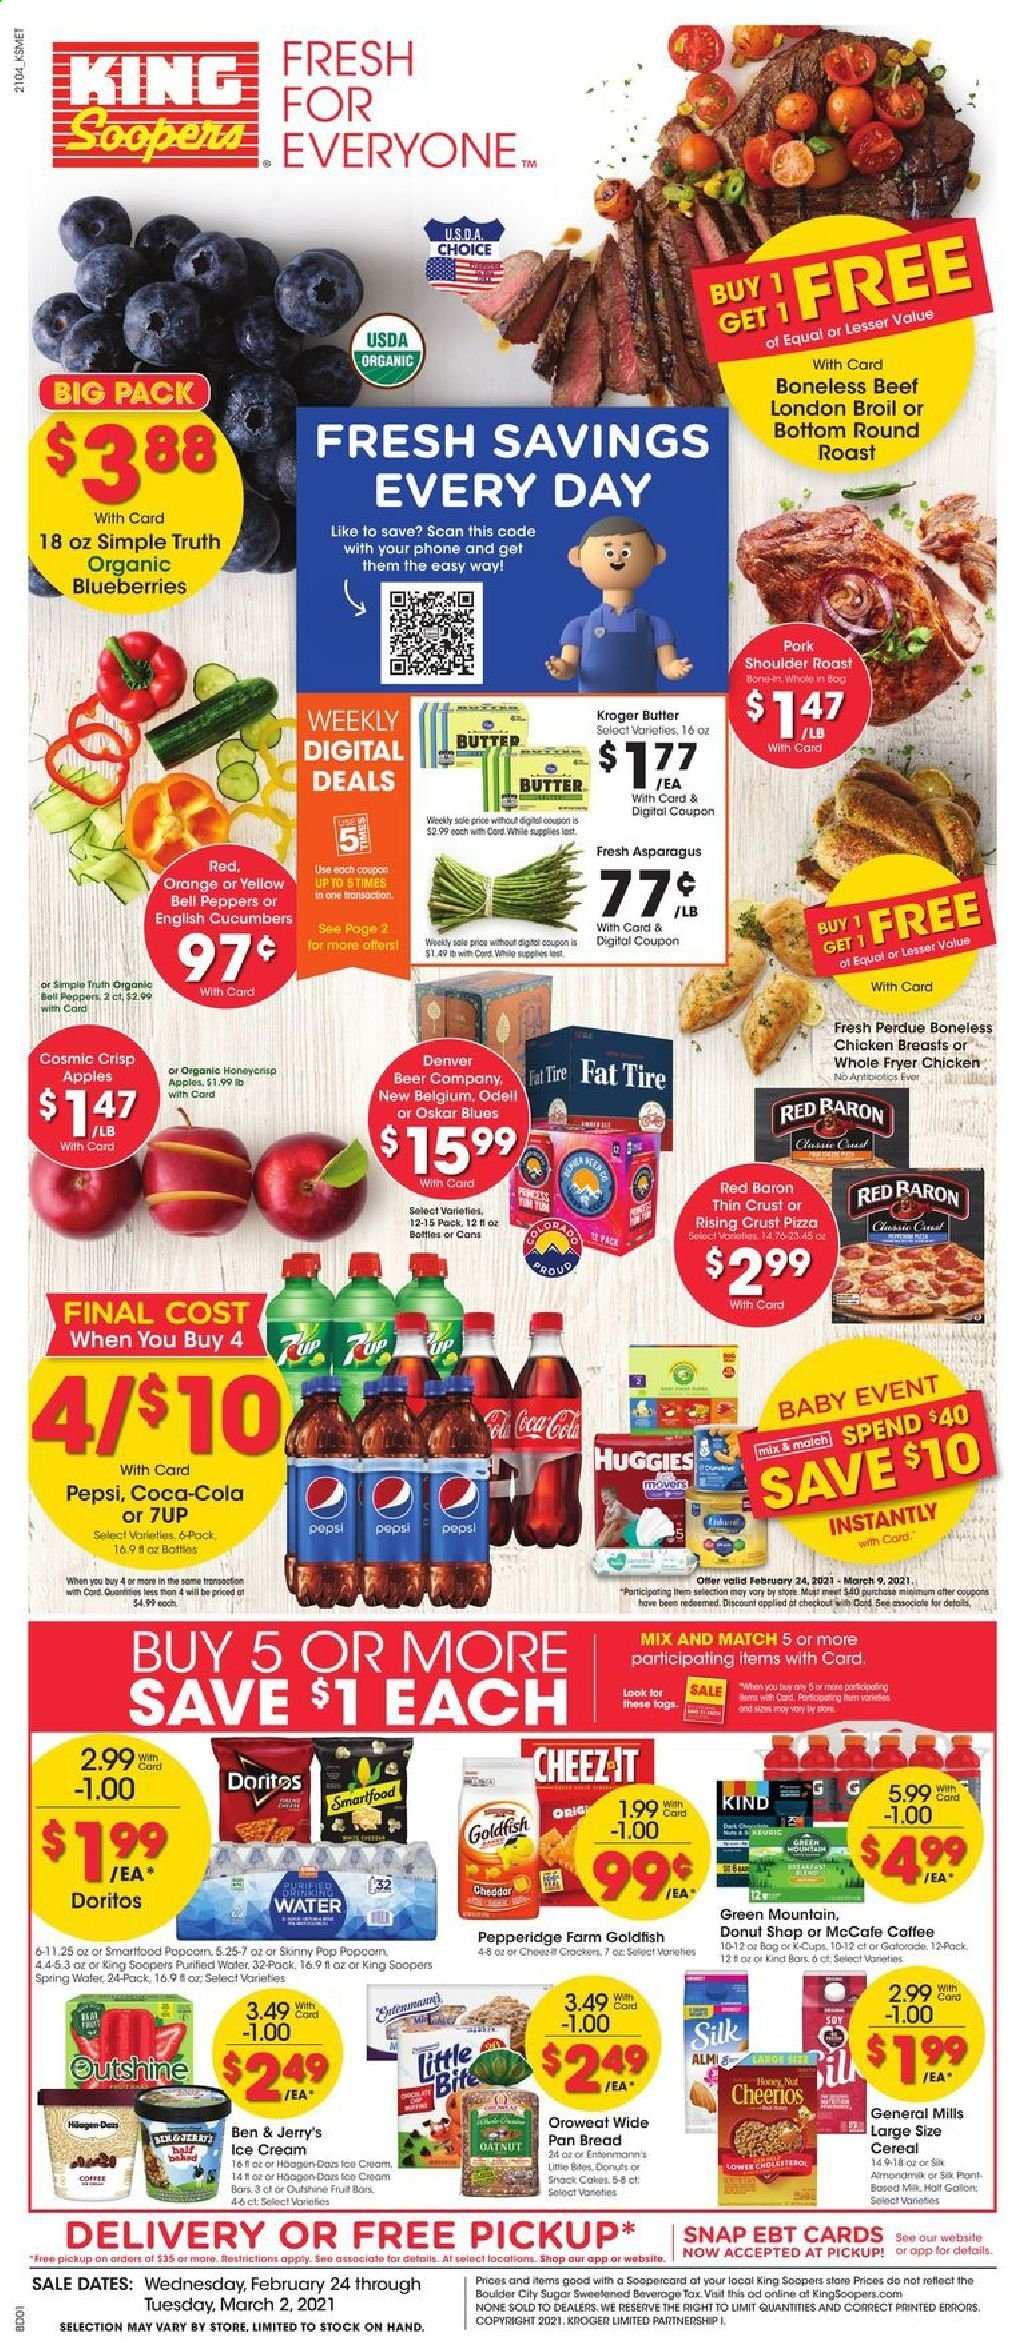 thumbnail - King Soopers Flyer - 02/24/2021 - 03/02/2021 - Sales products - blueberries, bread, cake, donut, Little Bites, apples, oranges, pizza, Perdue®, cheddar, Silk, ice cream, Ben & Jerry's, bell peppers, Red Baron, Doritos, snack, Smartfood, Goldfish, Skinny Pop, sugar, cucumber, cereals, Cheerios, Coca-Cola, Pepsi, 7UP, spring water, purified water, coffee, McCafe, Green Mountain, beer, chicken breasts, beef meat, round roast, pork meat, pork roast, pork shoulder, Huggies, pan, deep fryer. Page 1.